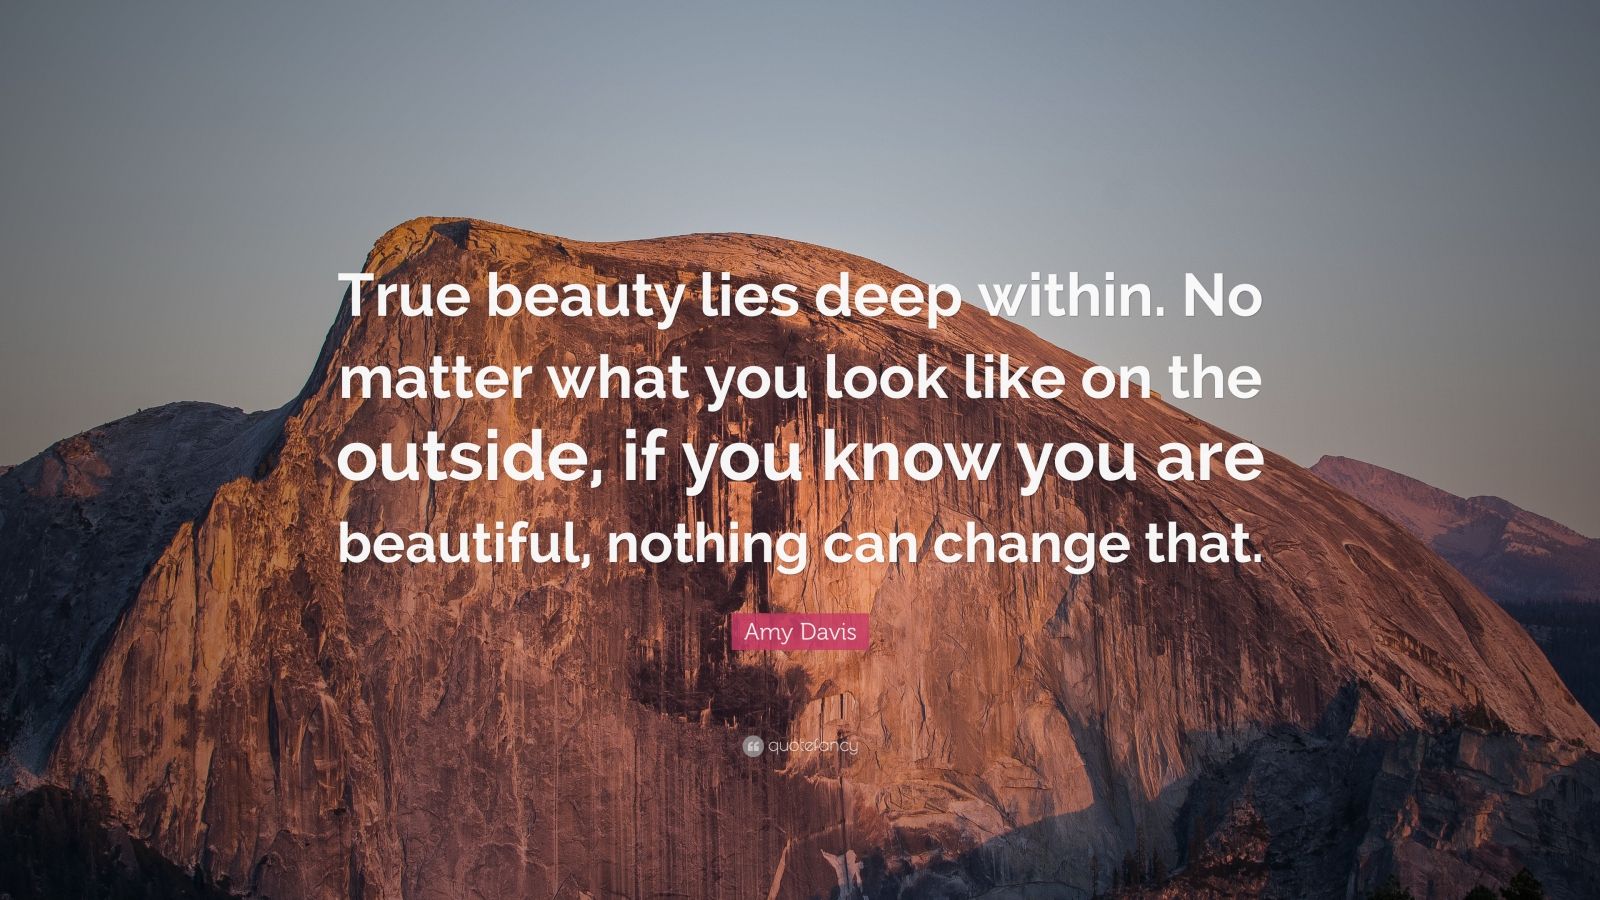 Amy Davis Quote: “True beauty lies deep within. No matter what you look ...